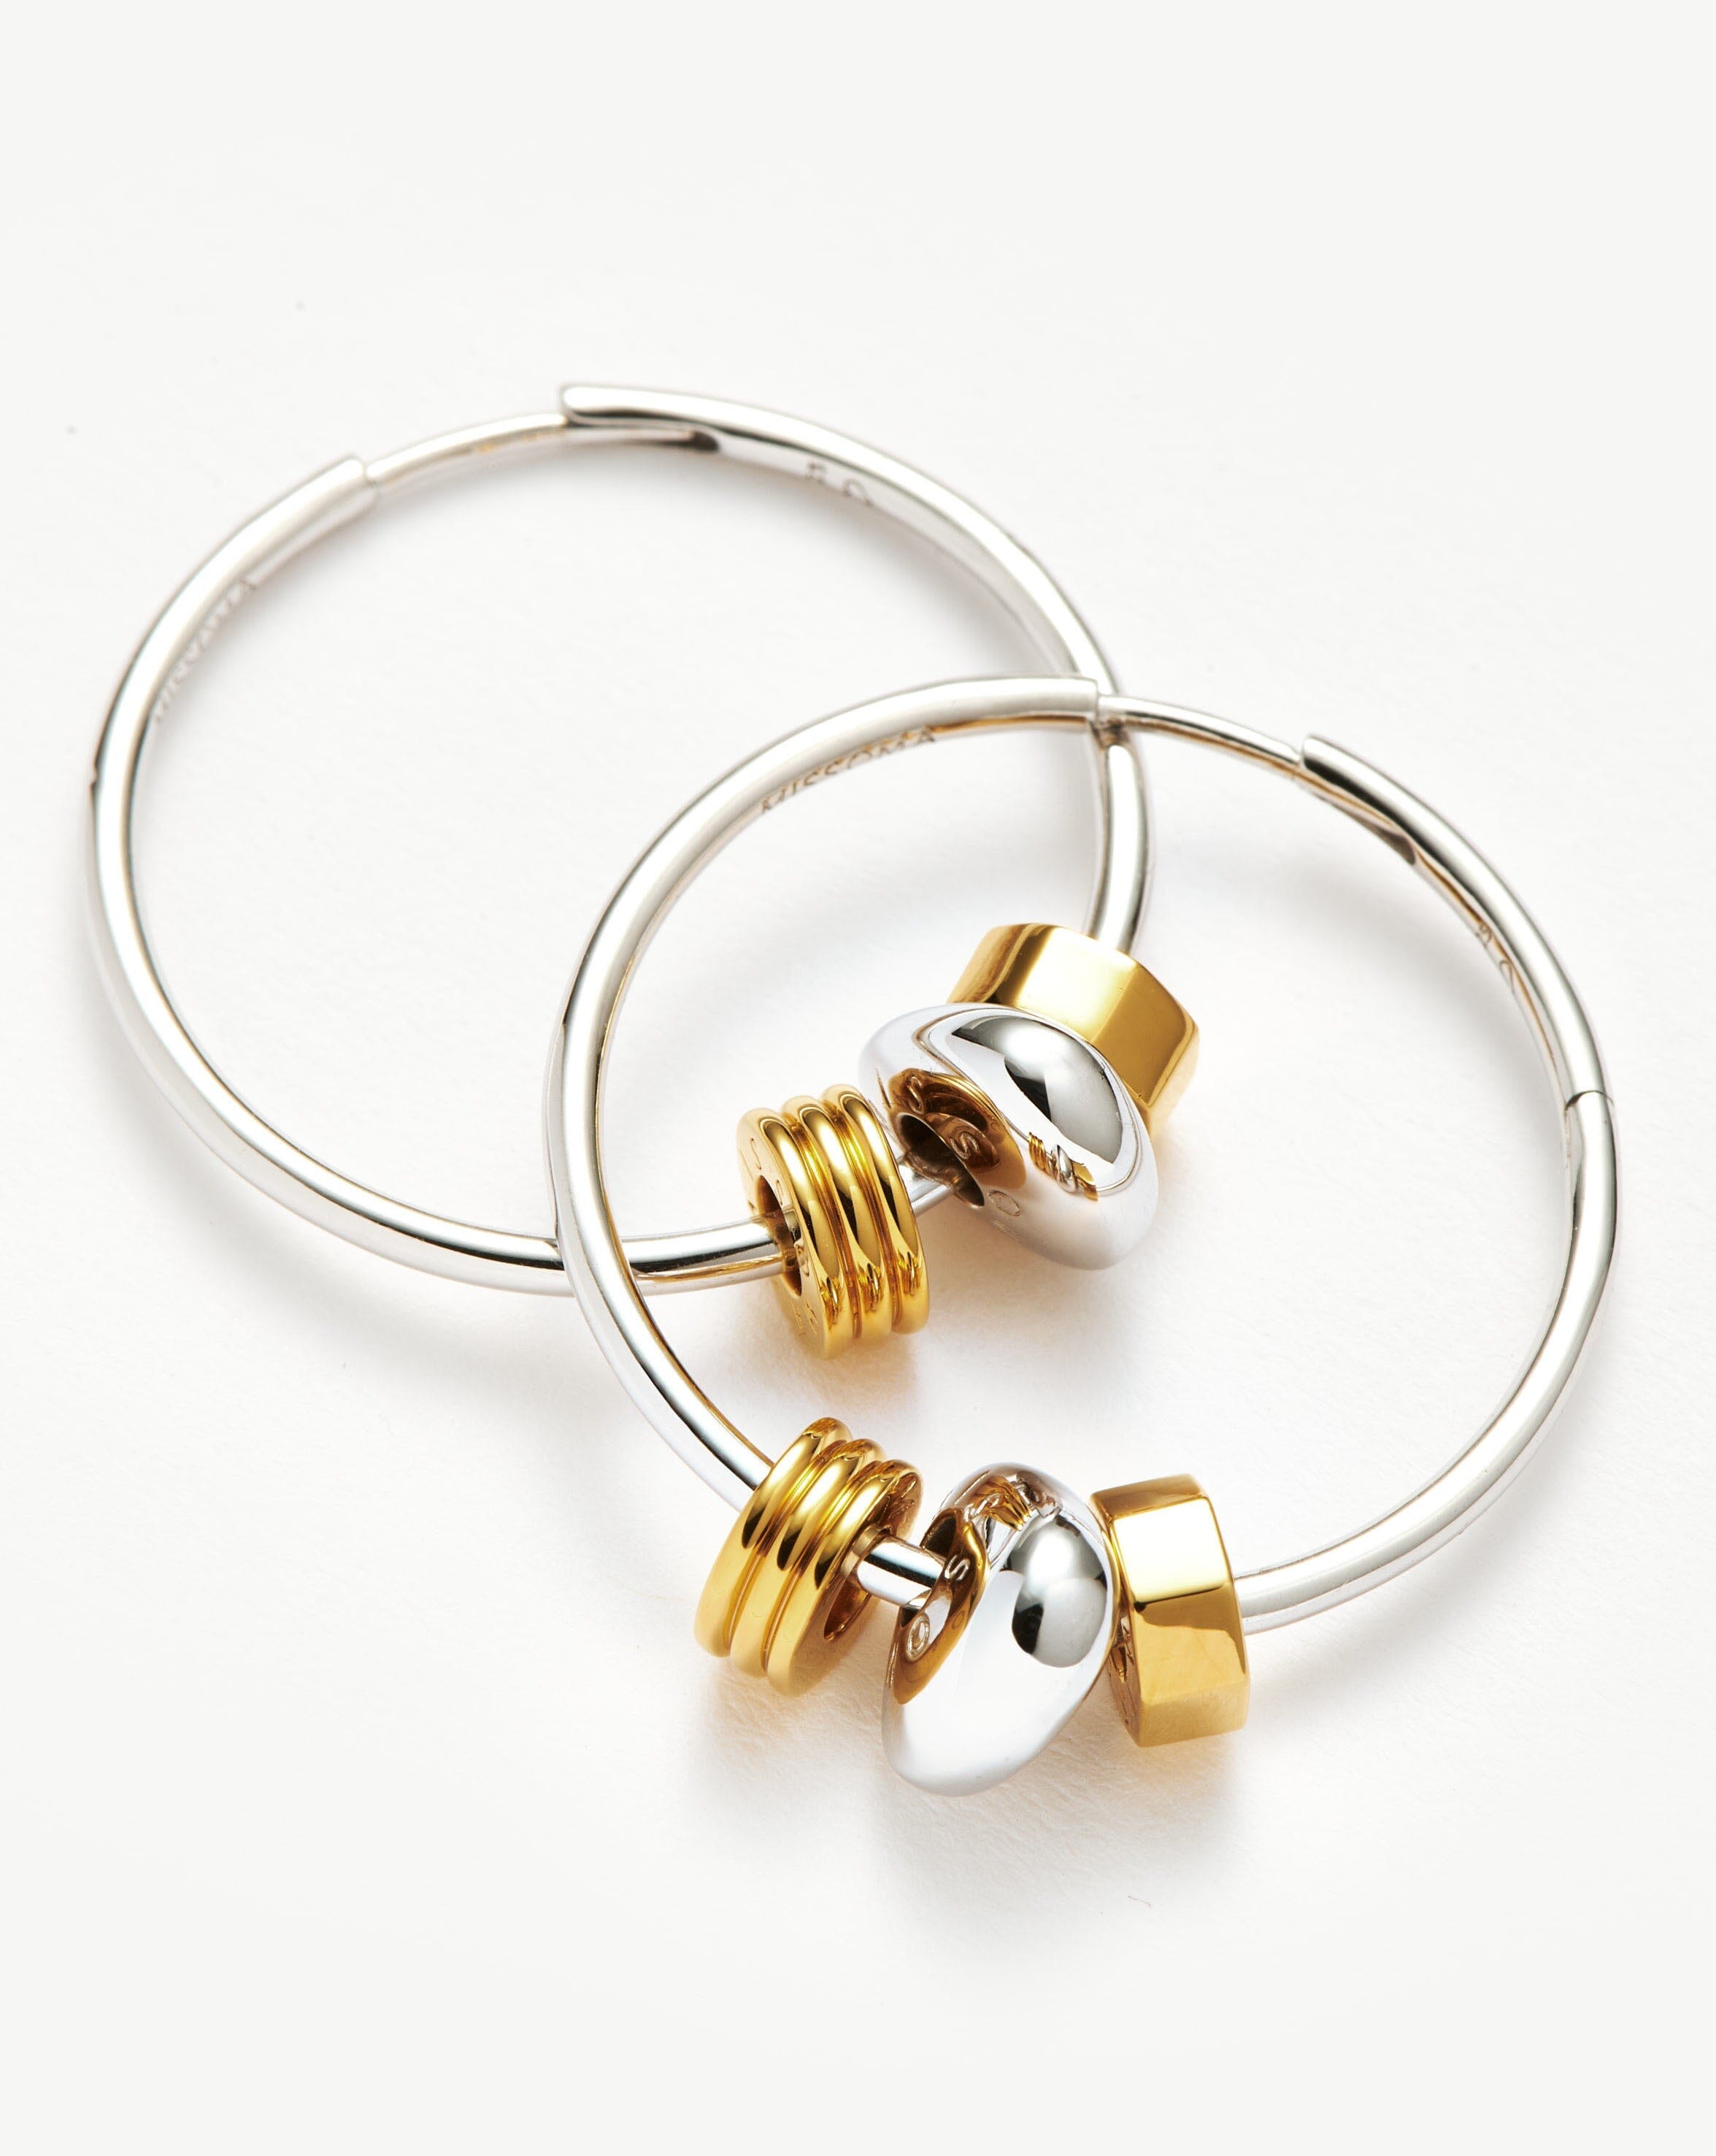 Abacus Beaded Large Charm Hoop Earrings | 18ct Recycled Gold Vermeil and Rhodium on Sterling Silver Earrings Missoma 